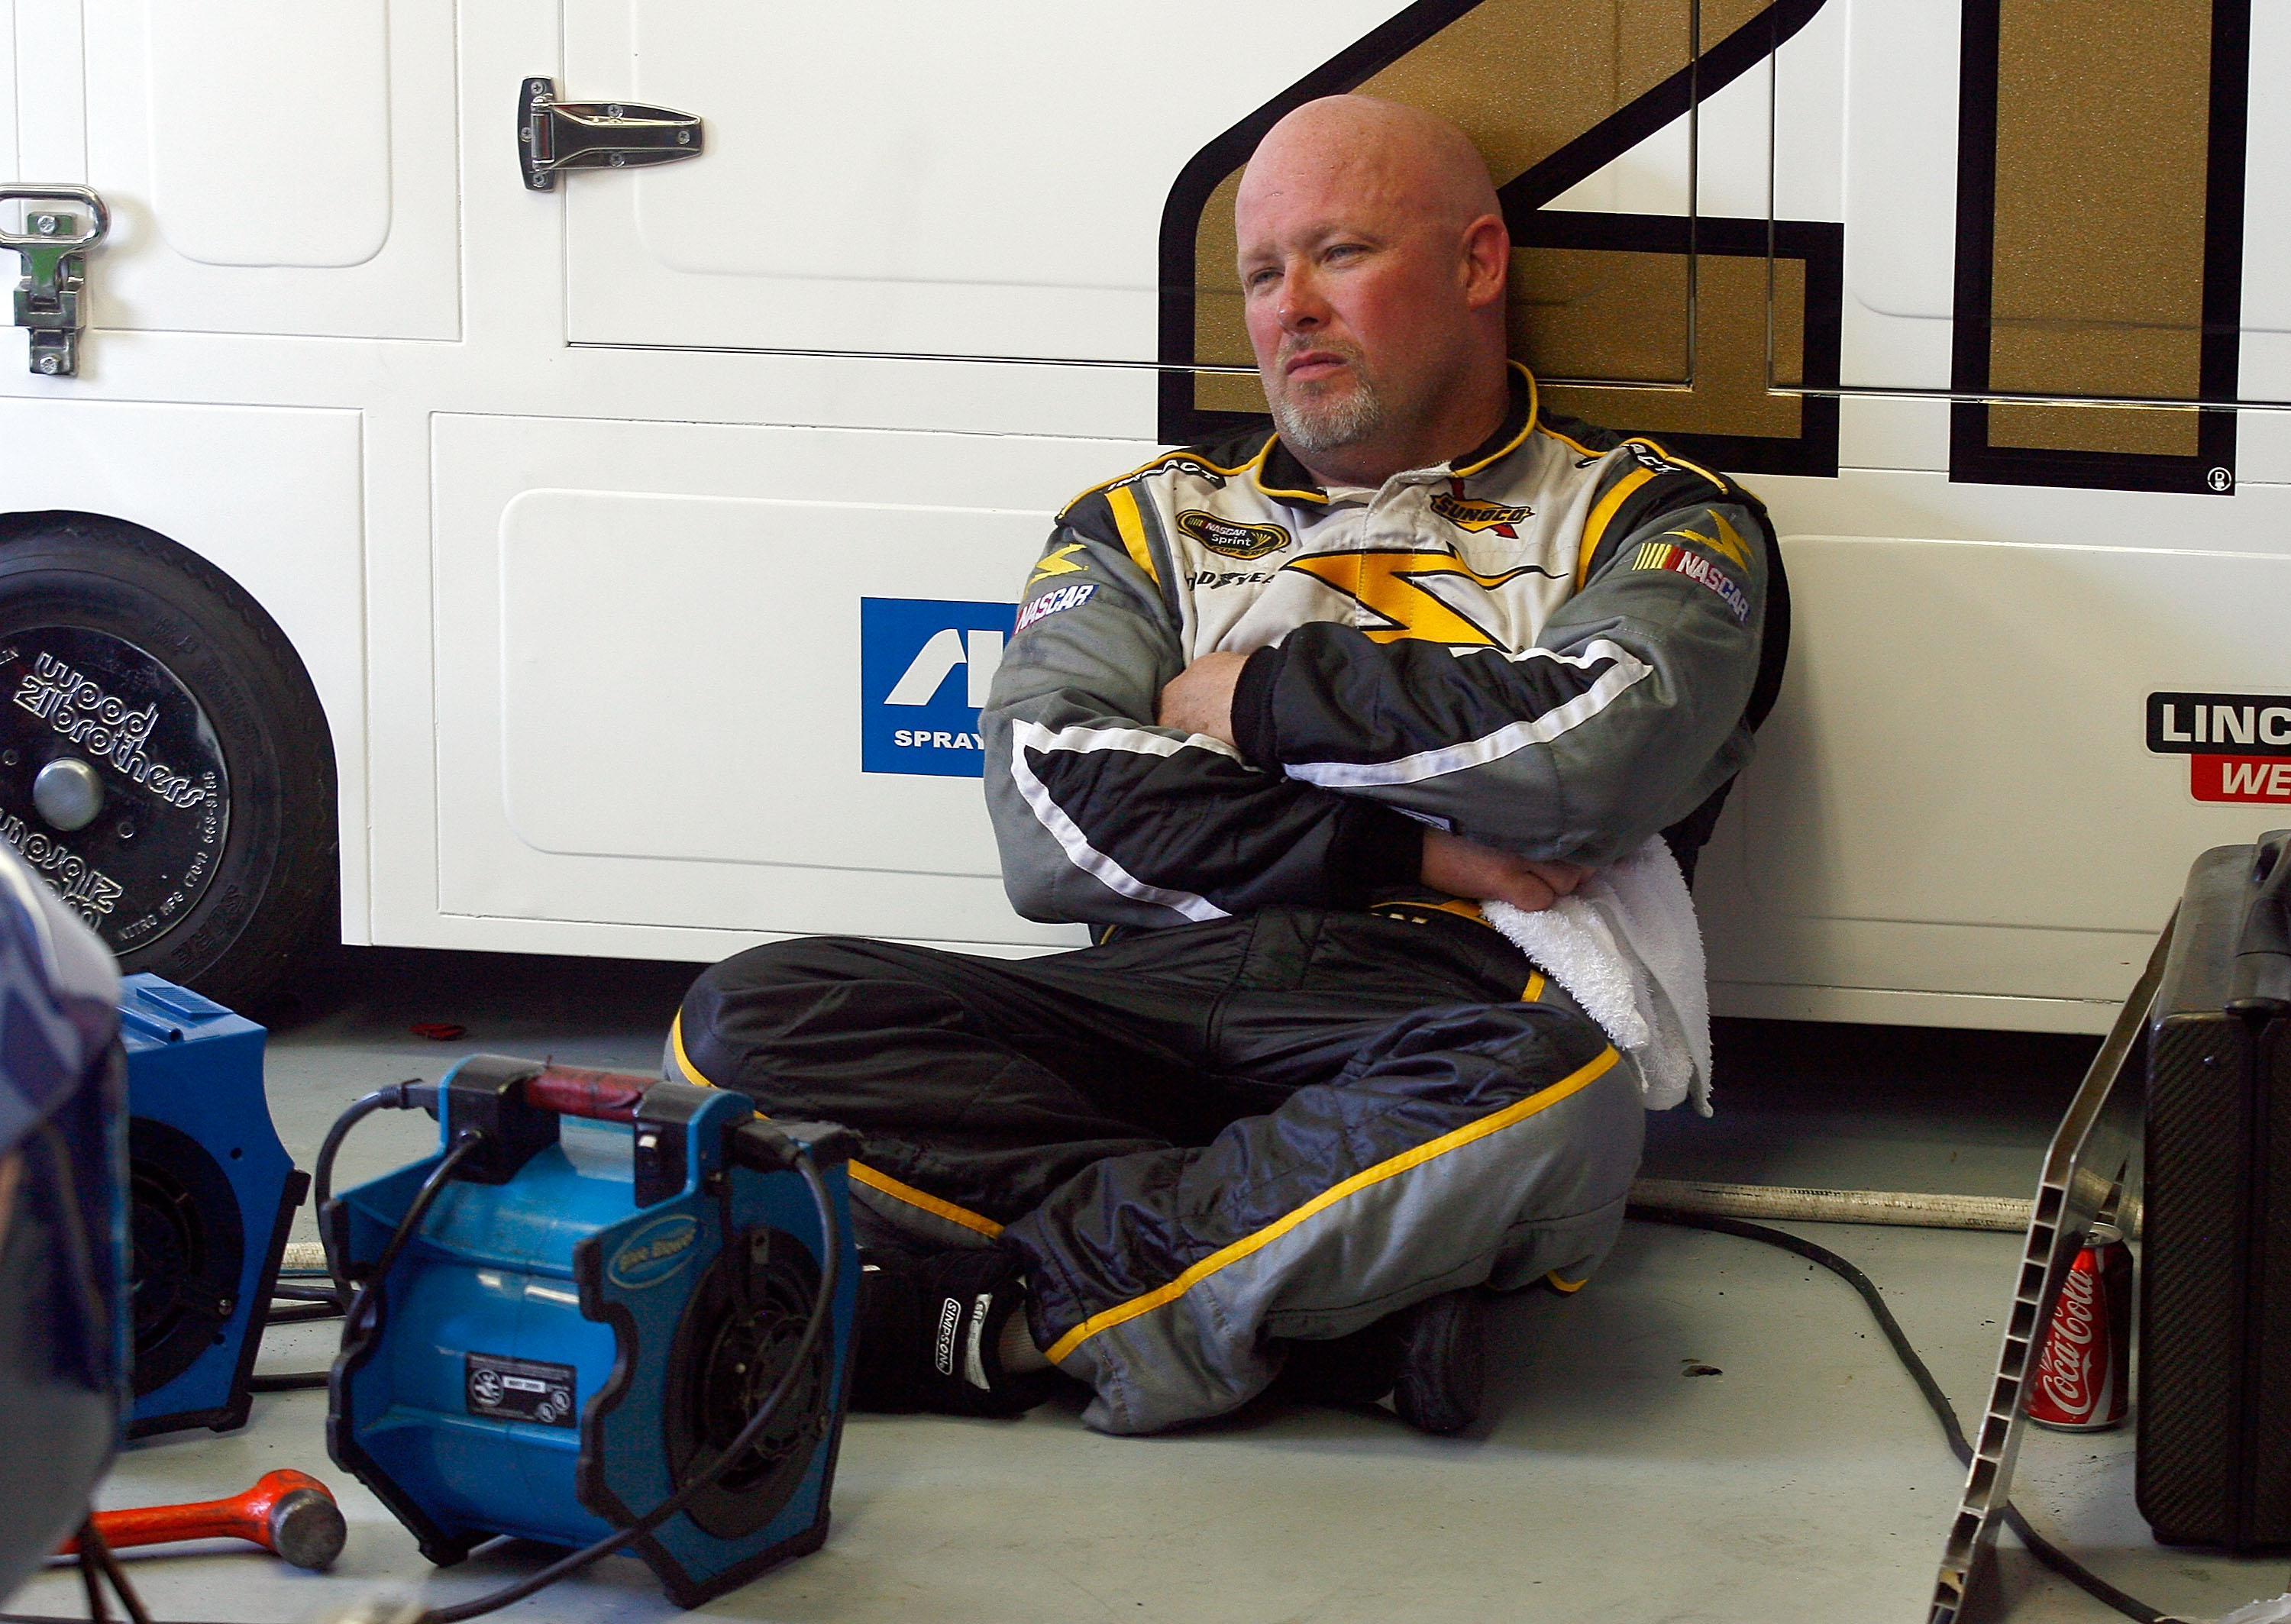 It has been a rough Sprint Cup season this year for the Bodine family